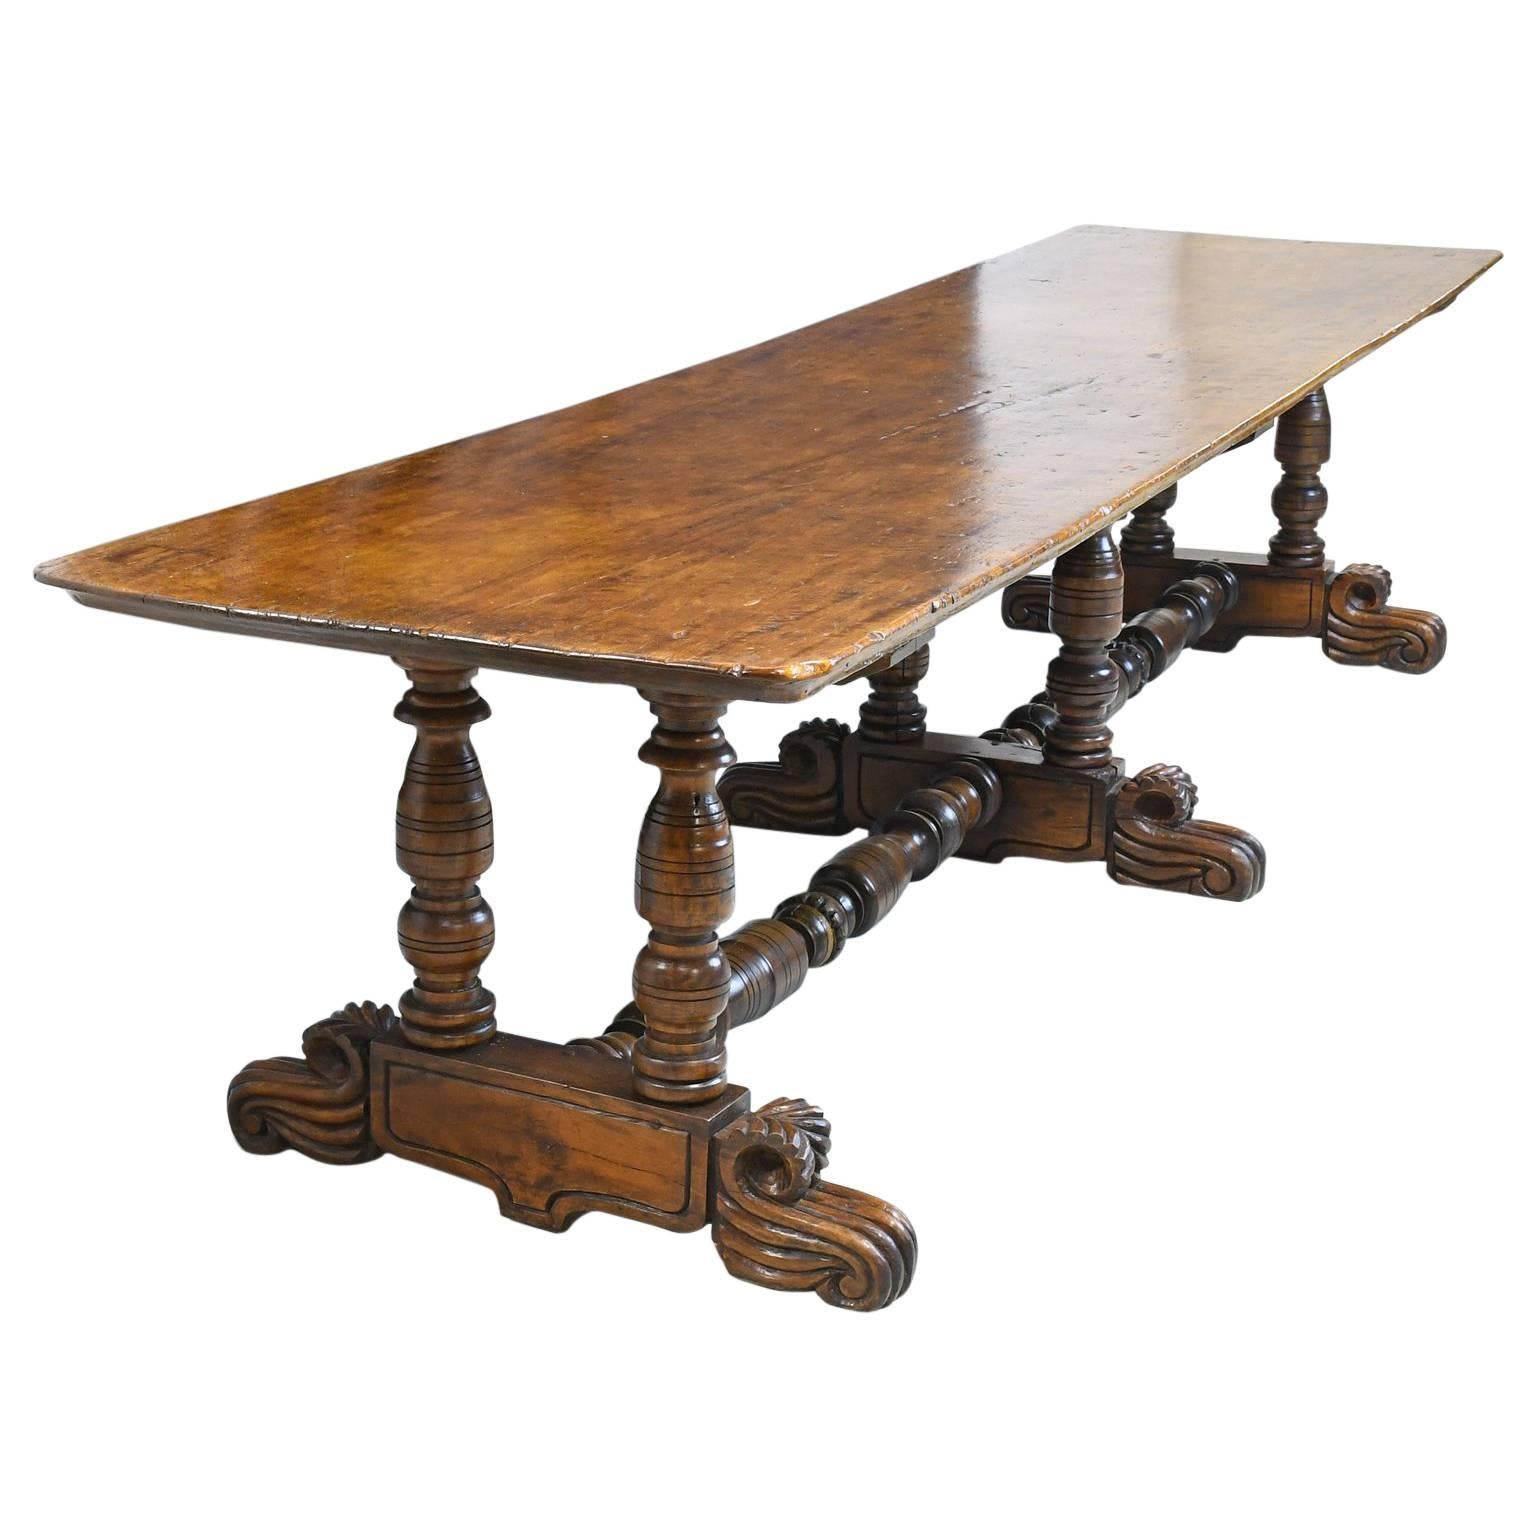 19th Century Spanish Colonial Rustic Dining Table with Carved Trestle Base